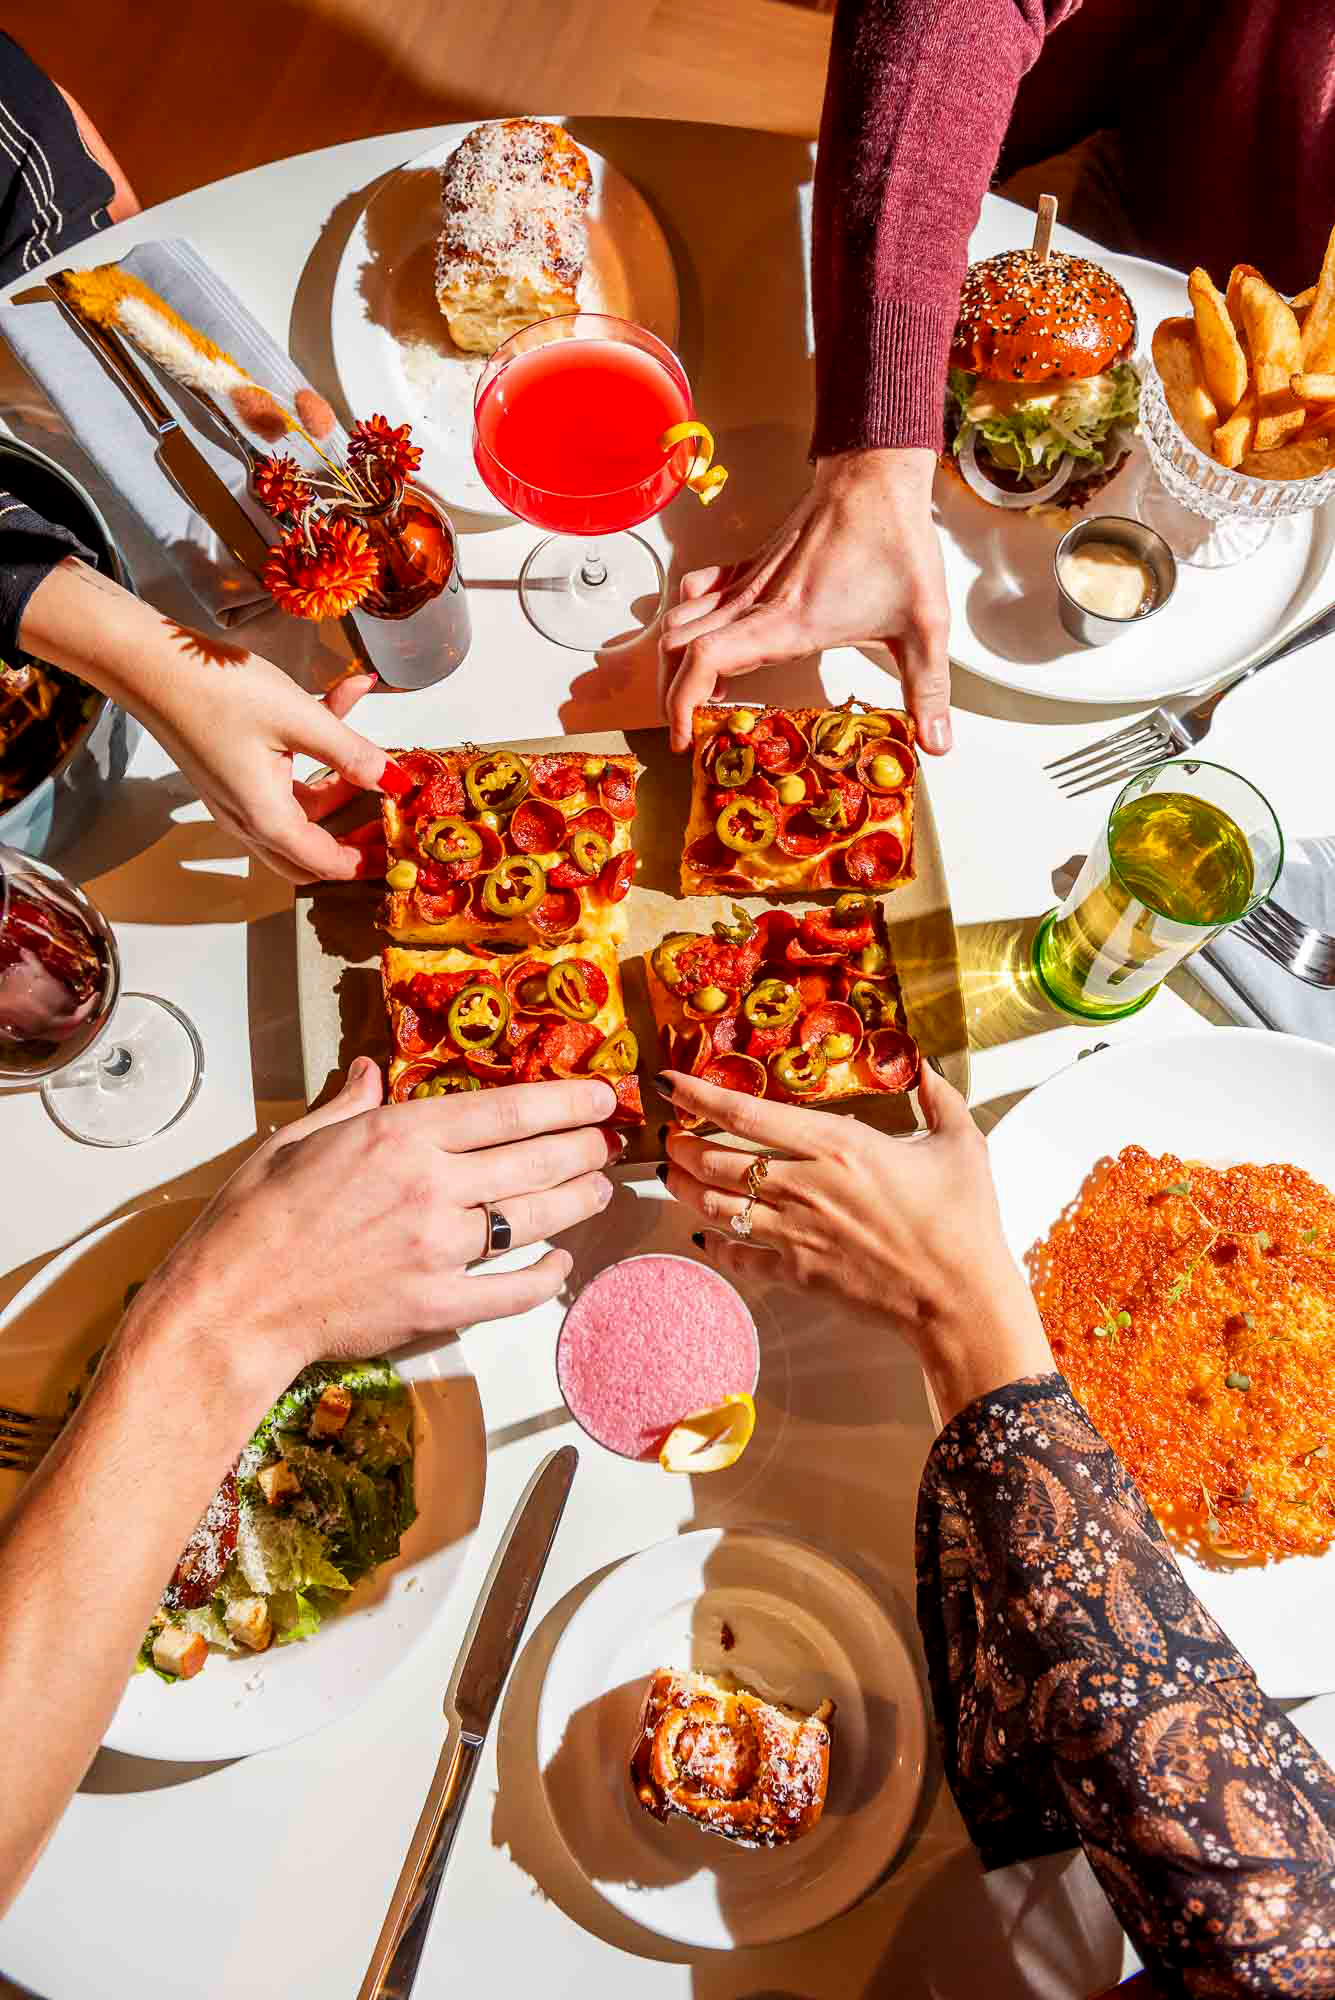 Hands reaching in to grab a slice of Detroit-style pizza at The Joneses restaurant in Toronto